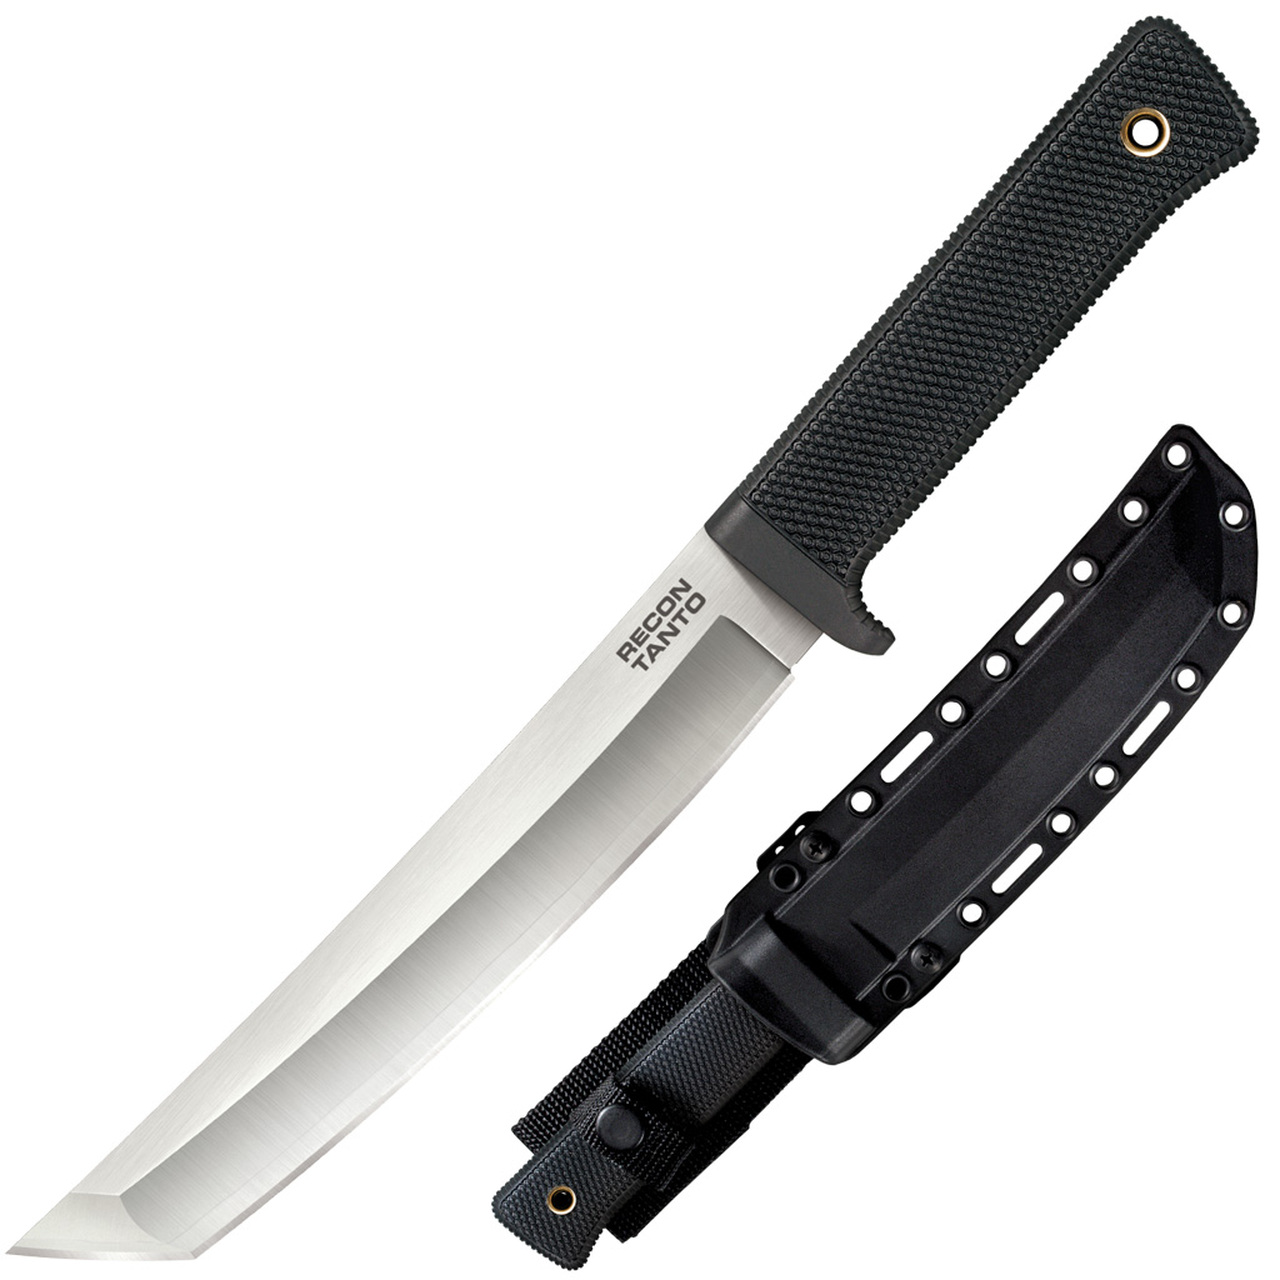 COLD STEEL Recon Tanto Fixed Blade 35AM Knife VG-10 San Mai Stainless Steel Knives